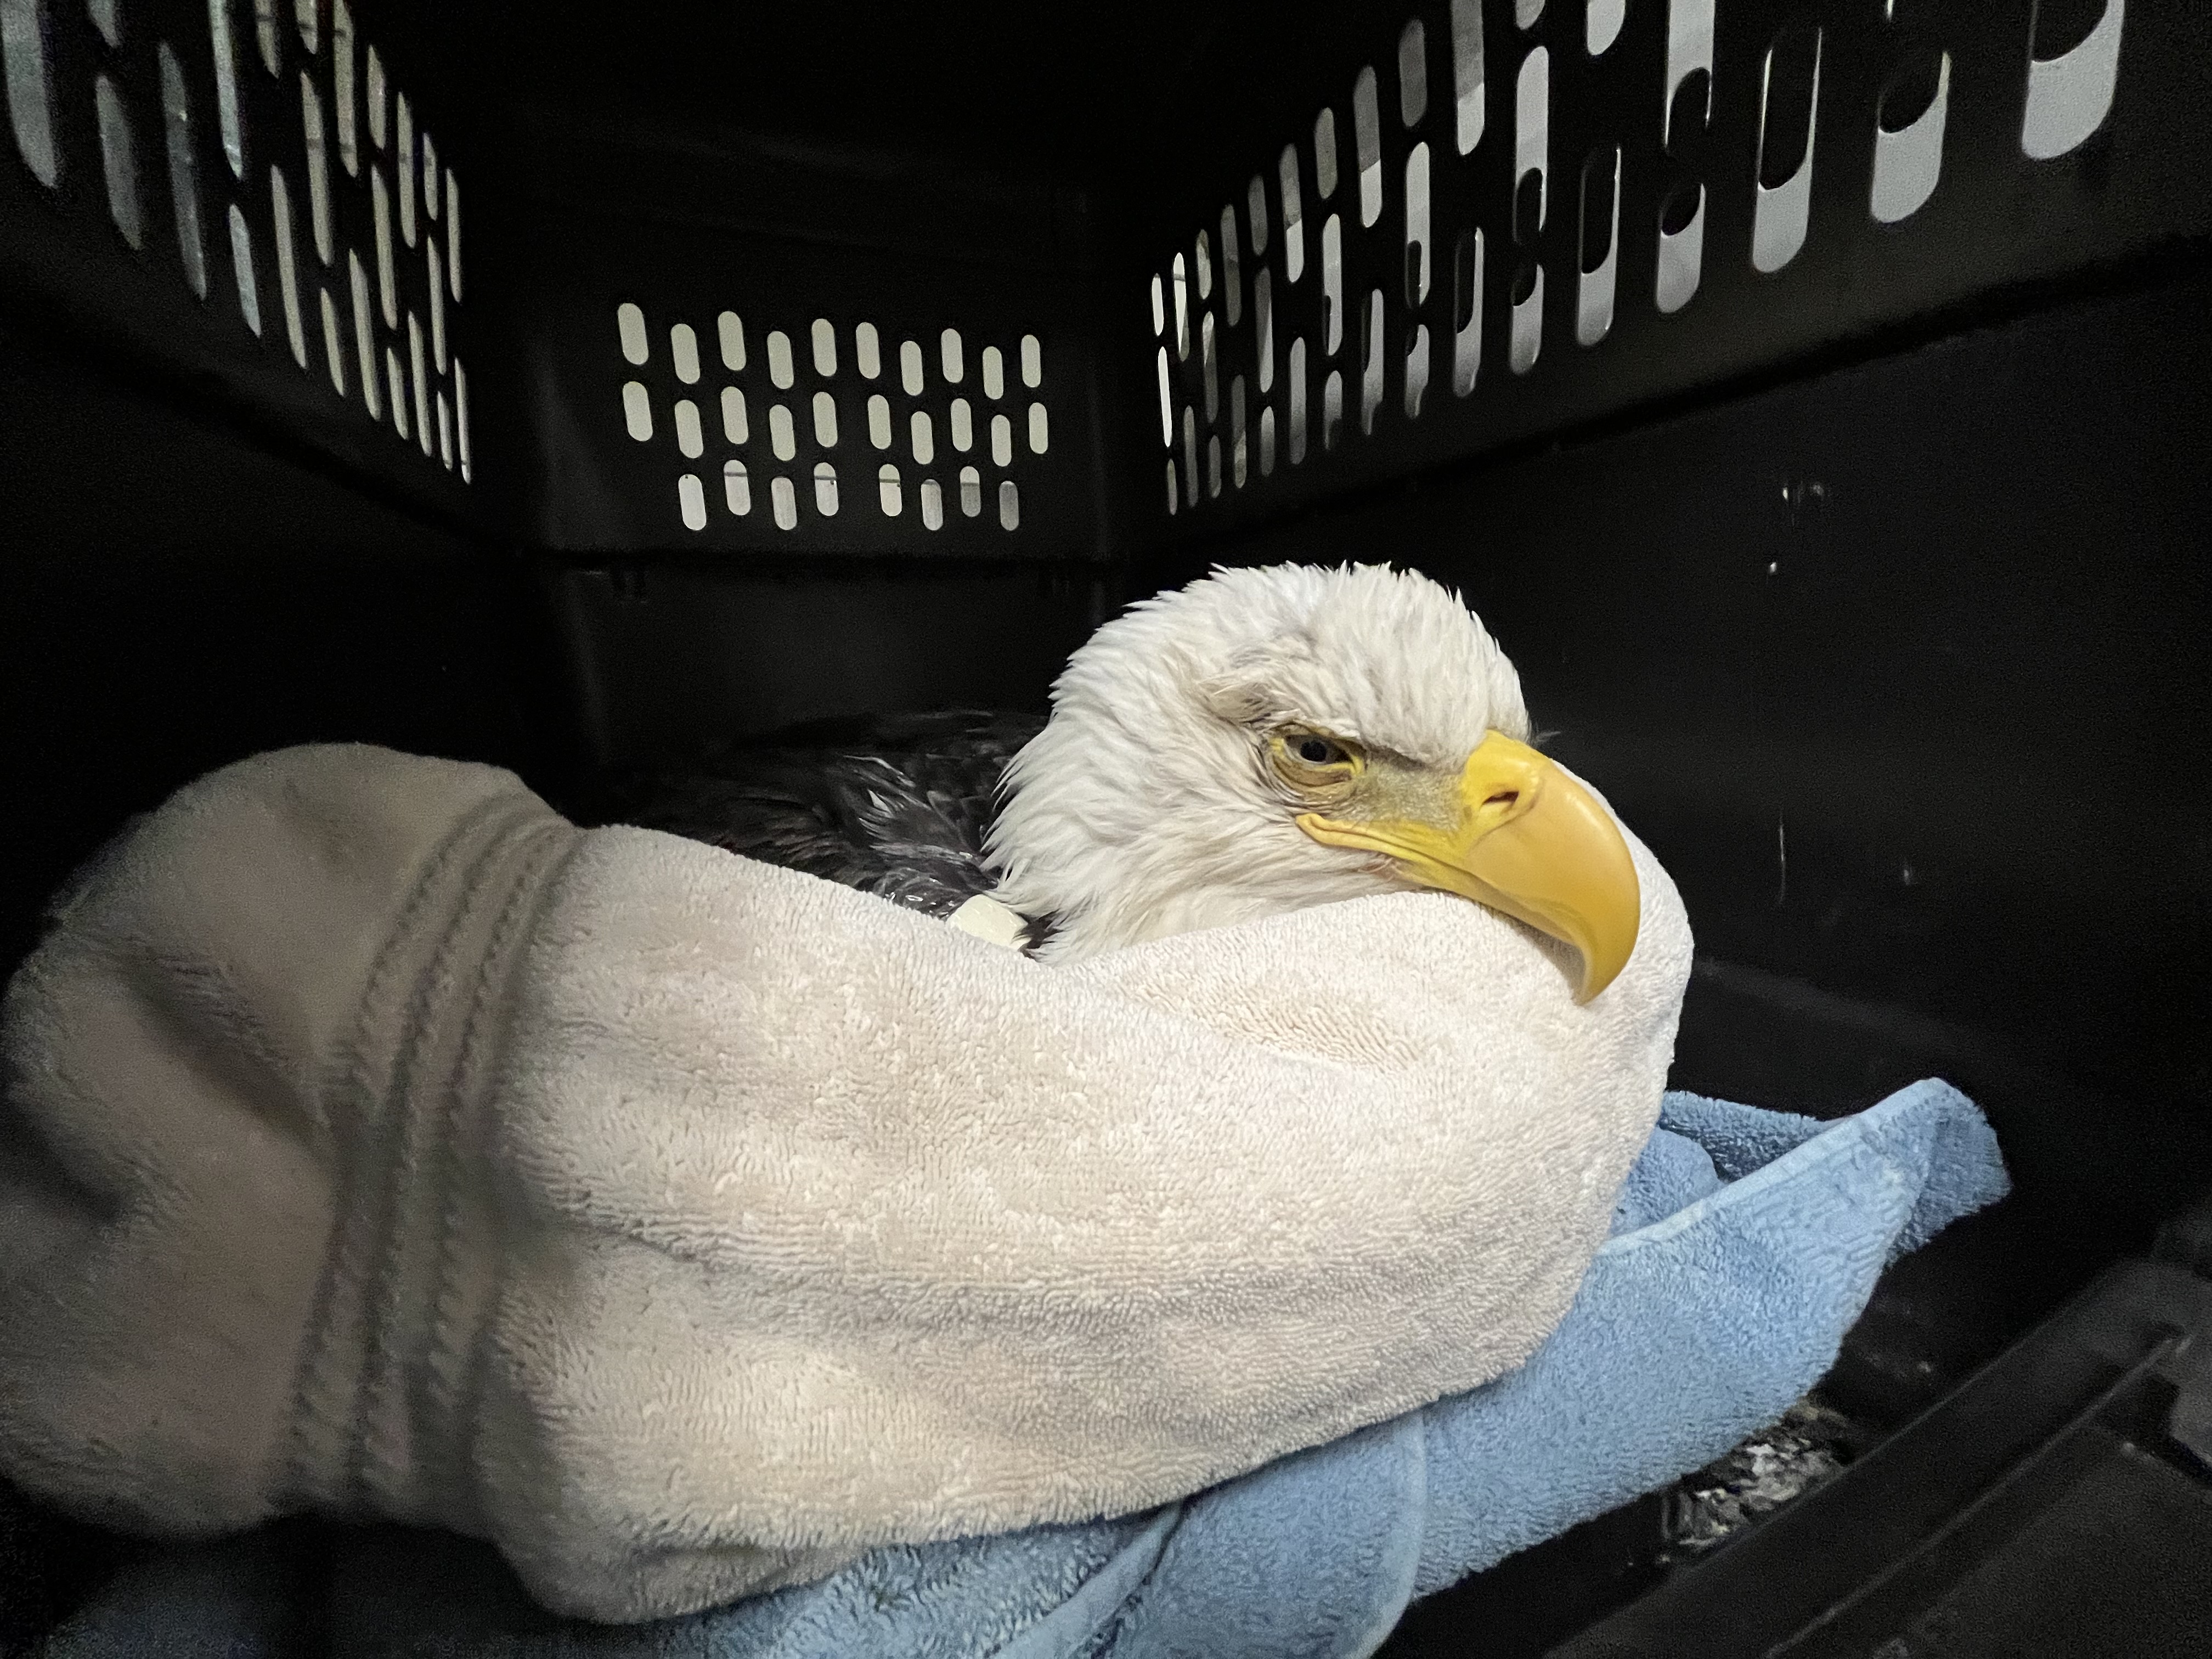 a bald eagle with barbituate poisoning